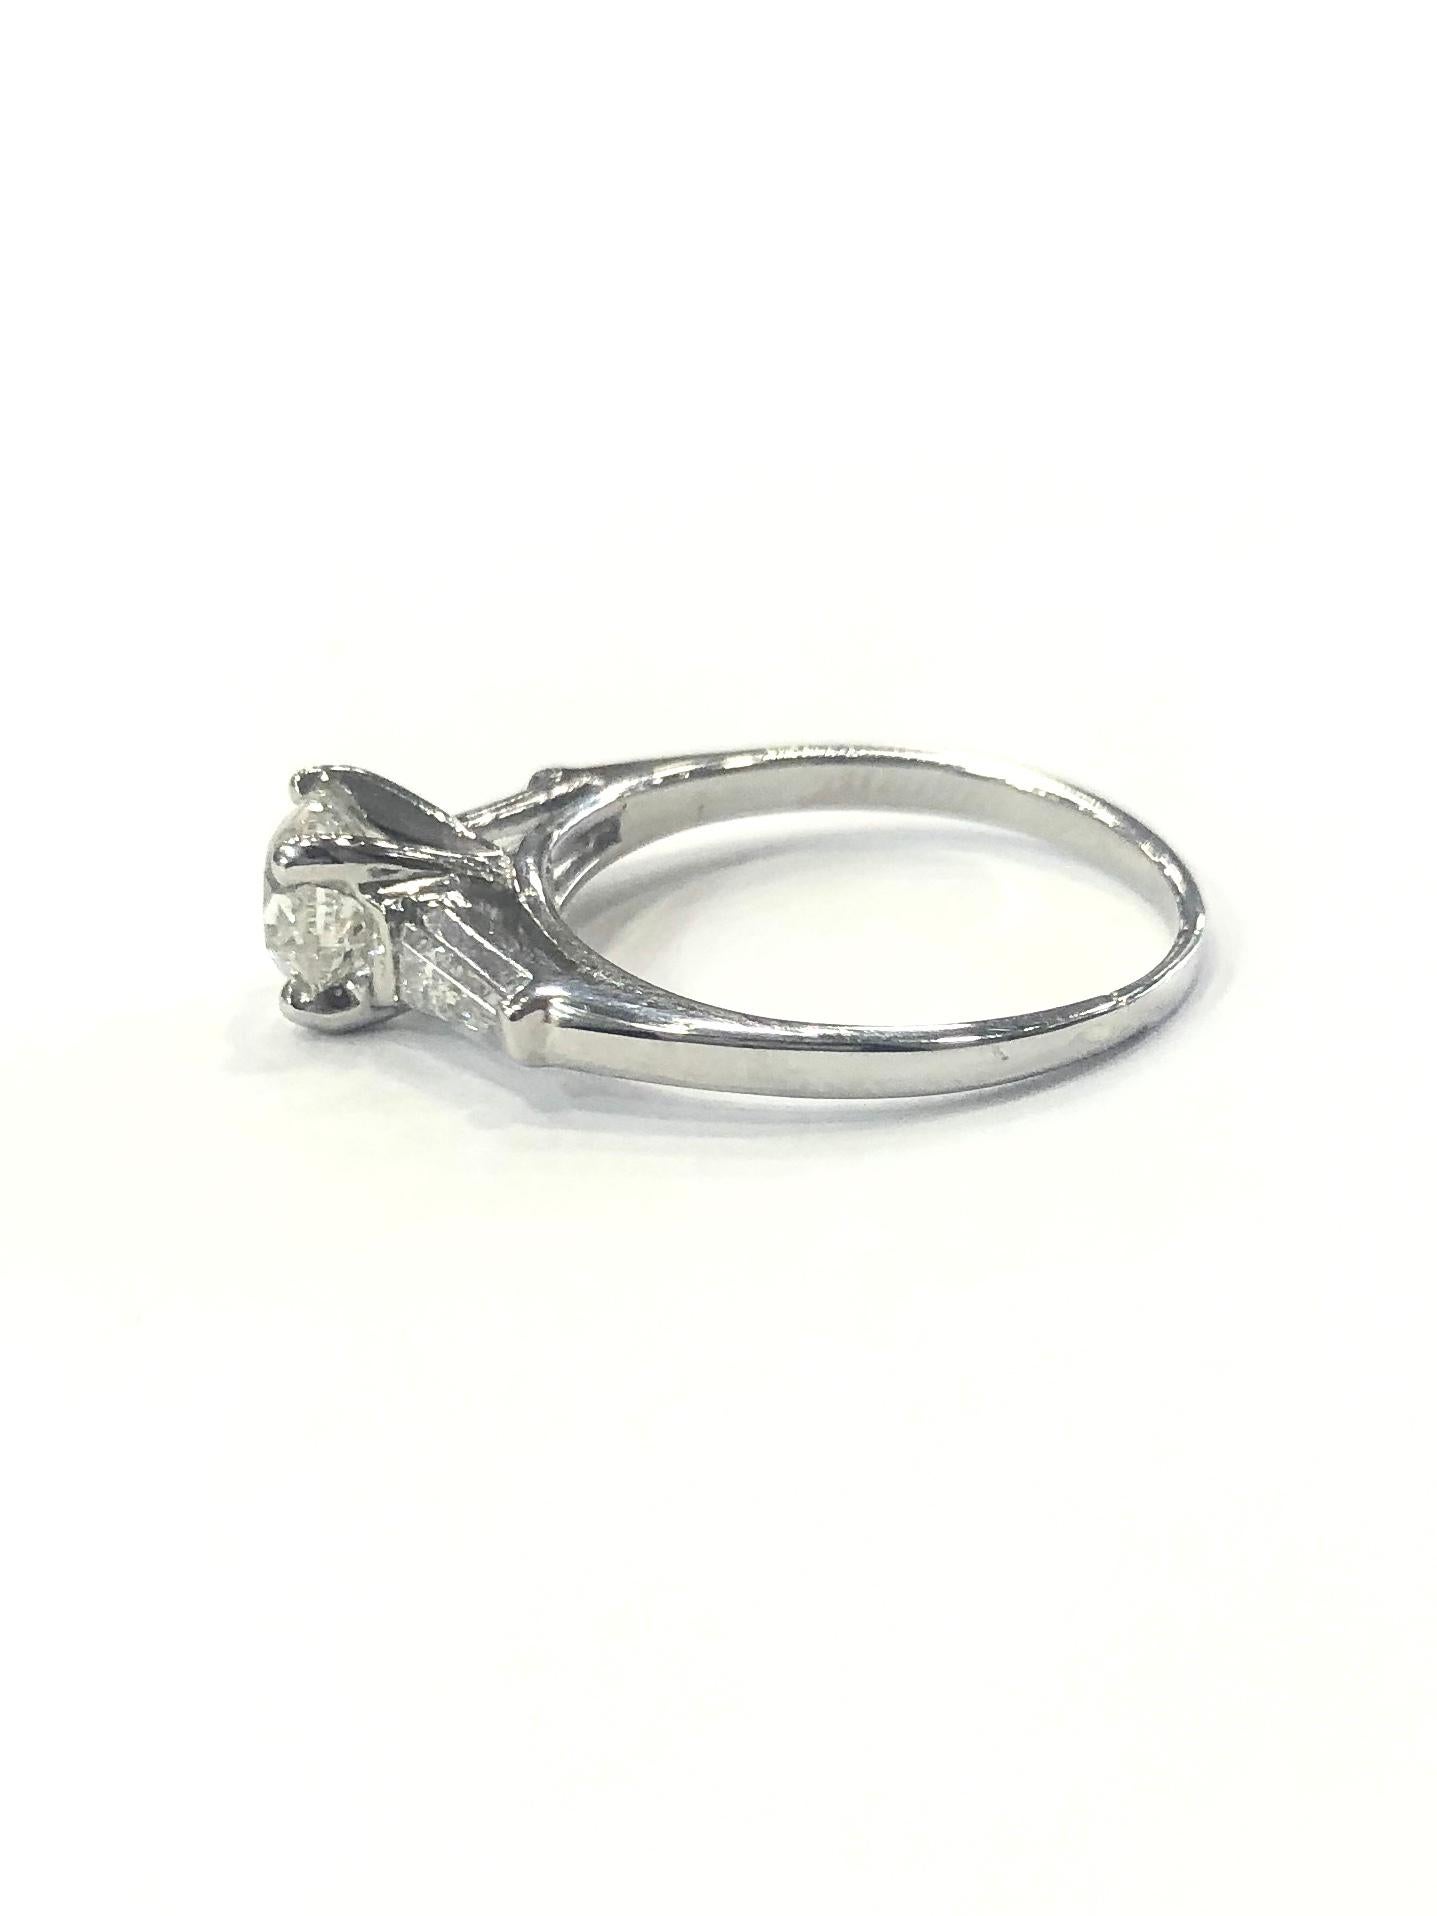 Platinum Certified Single Stone Diamond Engagement Ring. Set with one certified round brilliant cut diamond set in a four claw setting.
Set with two tapered Baguette diamonds diamonds on the shoulders. (one each side)
Edwardian style.

International